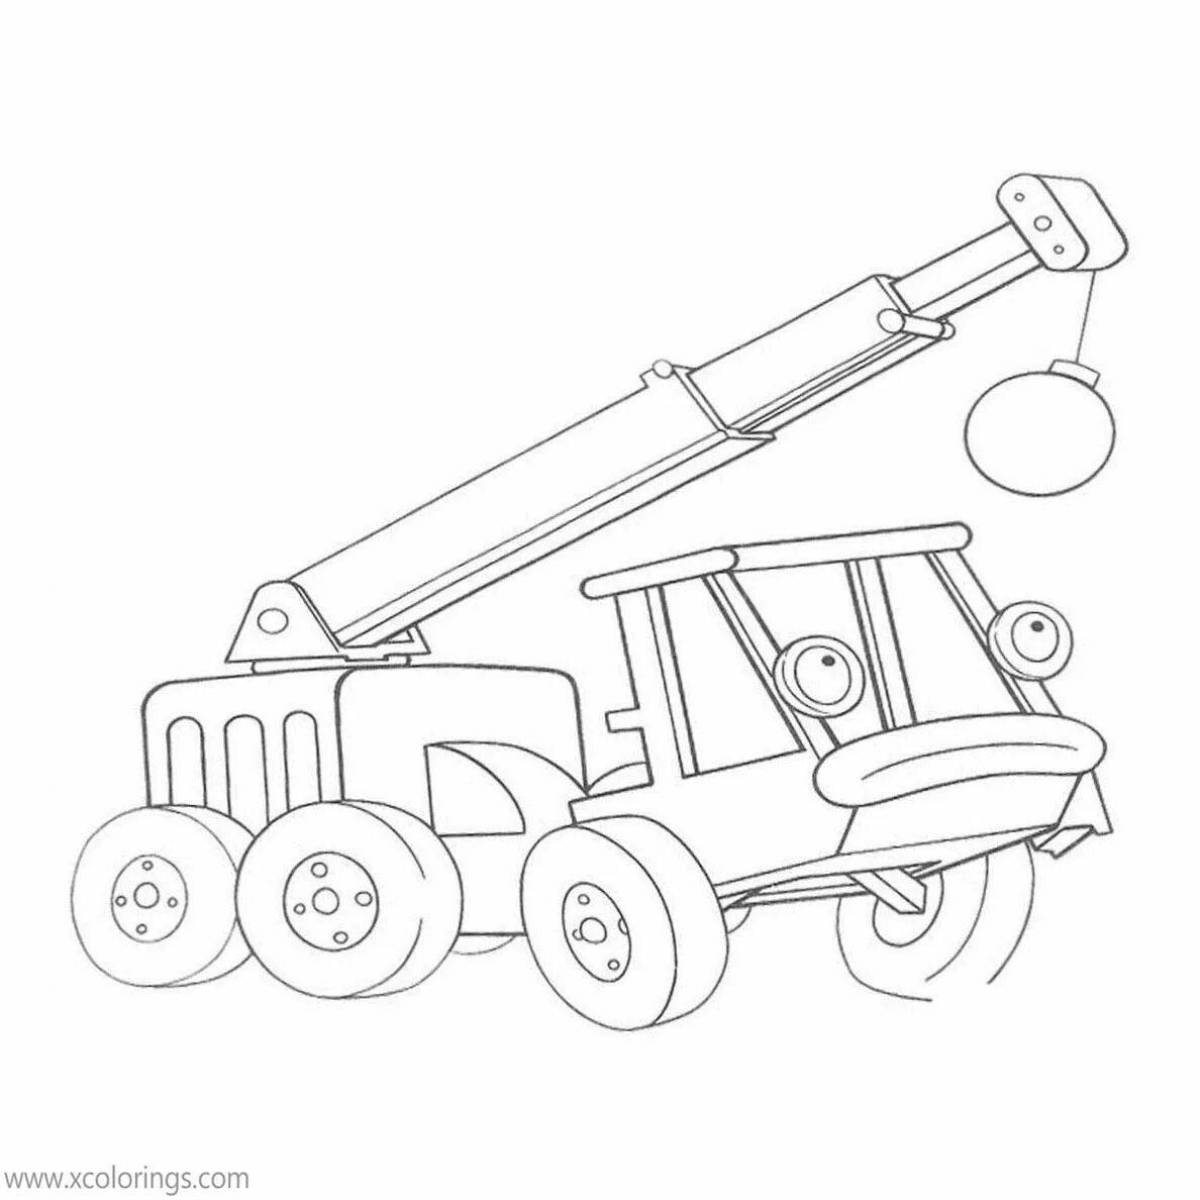 Action-filled drilling machine coloring page